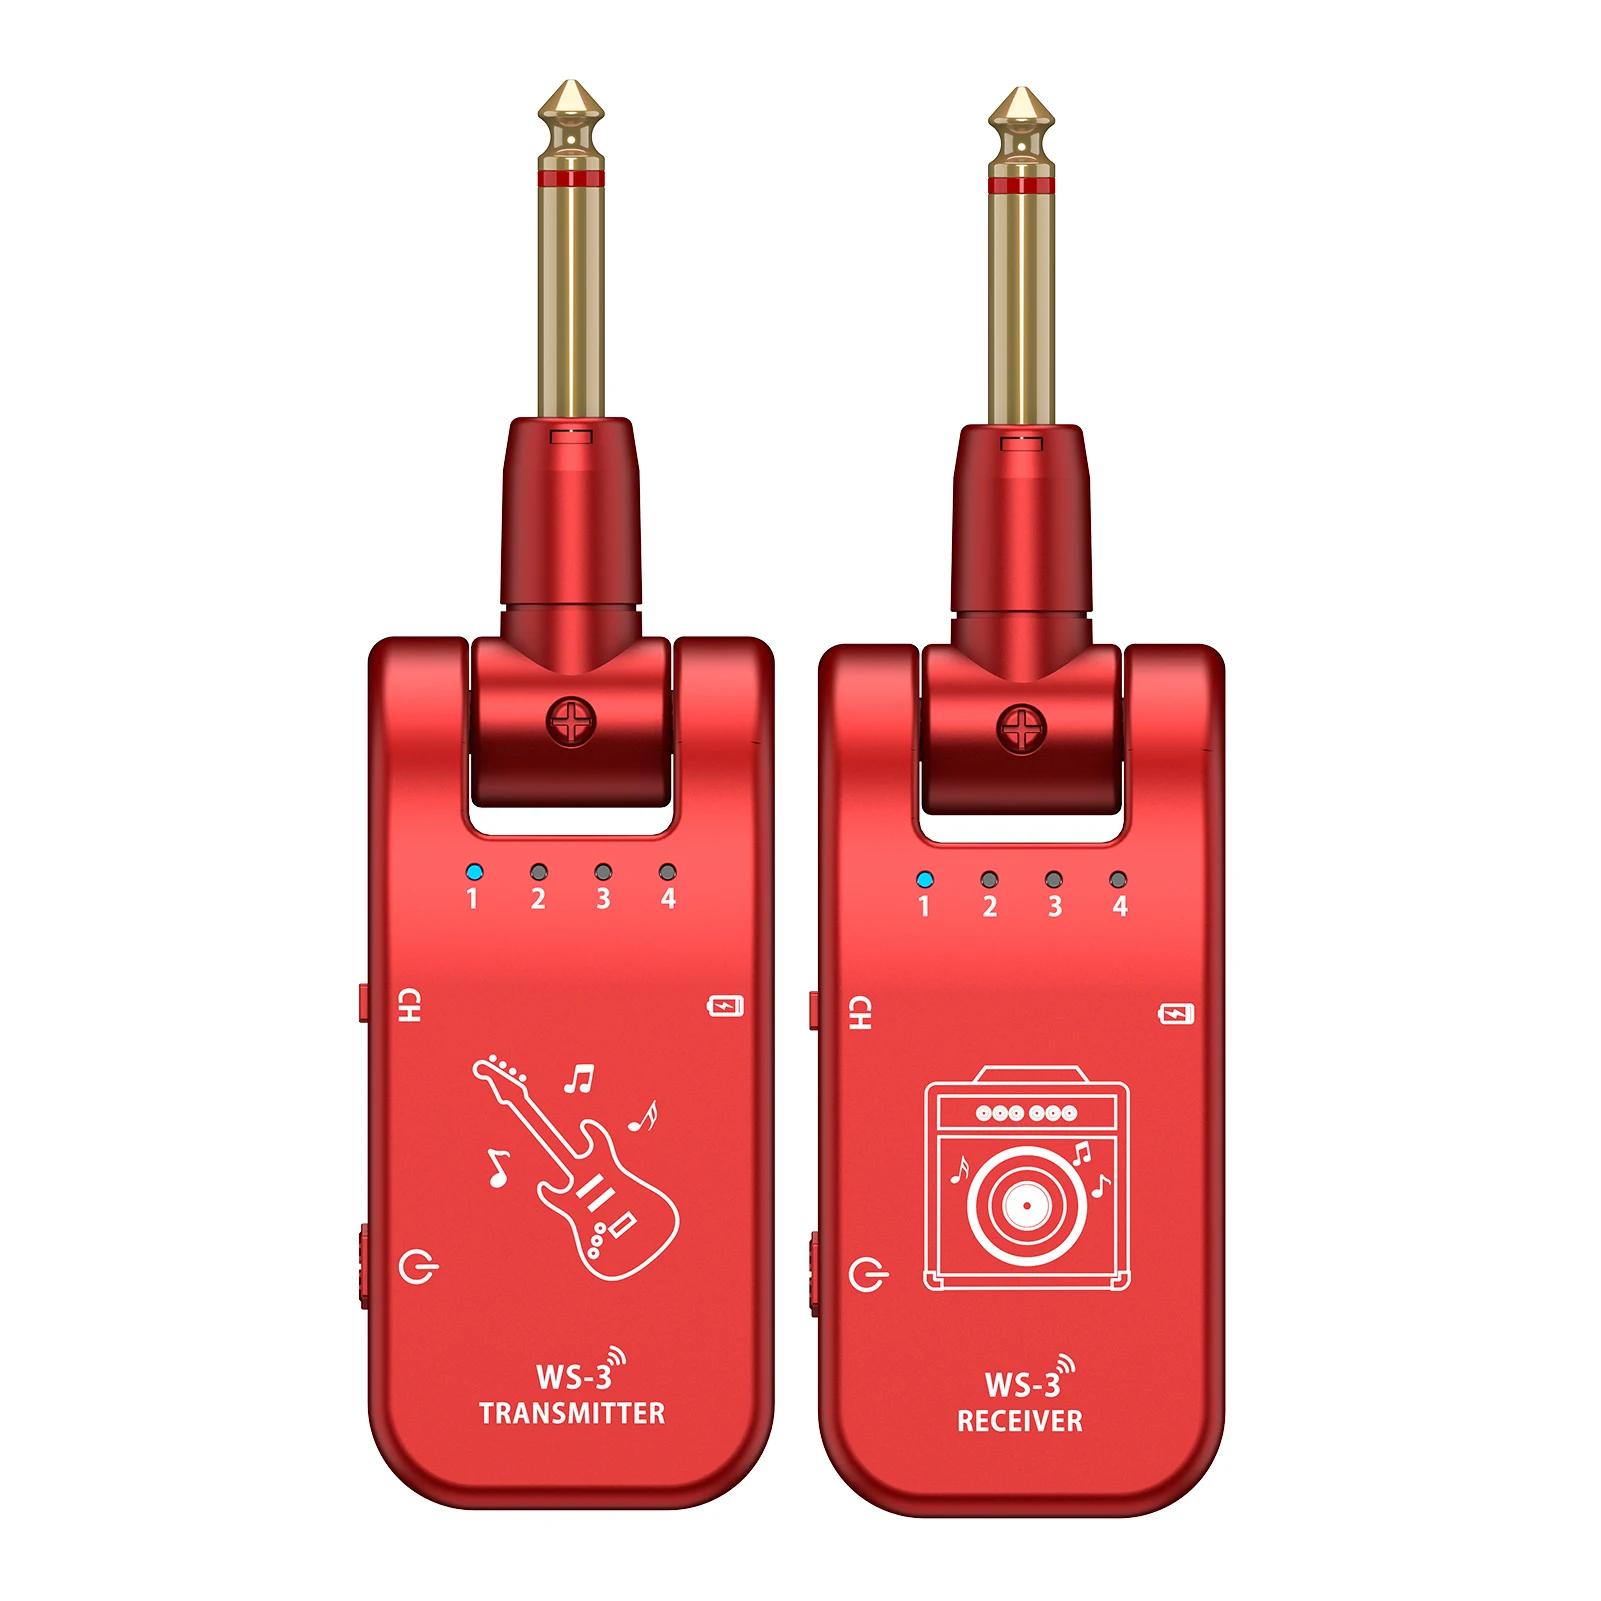 UHF 4 Channels Wireless Guitar System Transmitter and Receiver 800MHz-900MHz Plug and Play 282-degree Rotation Guita